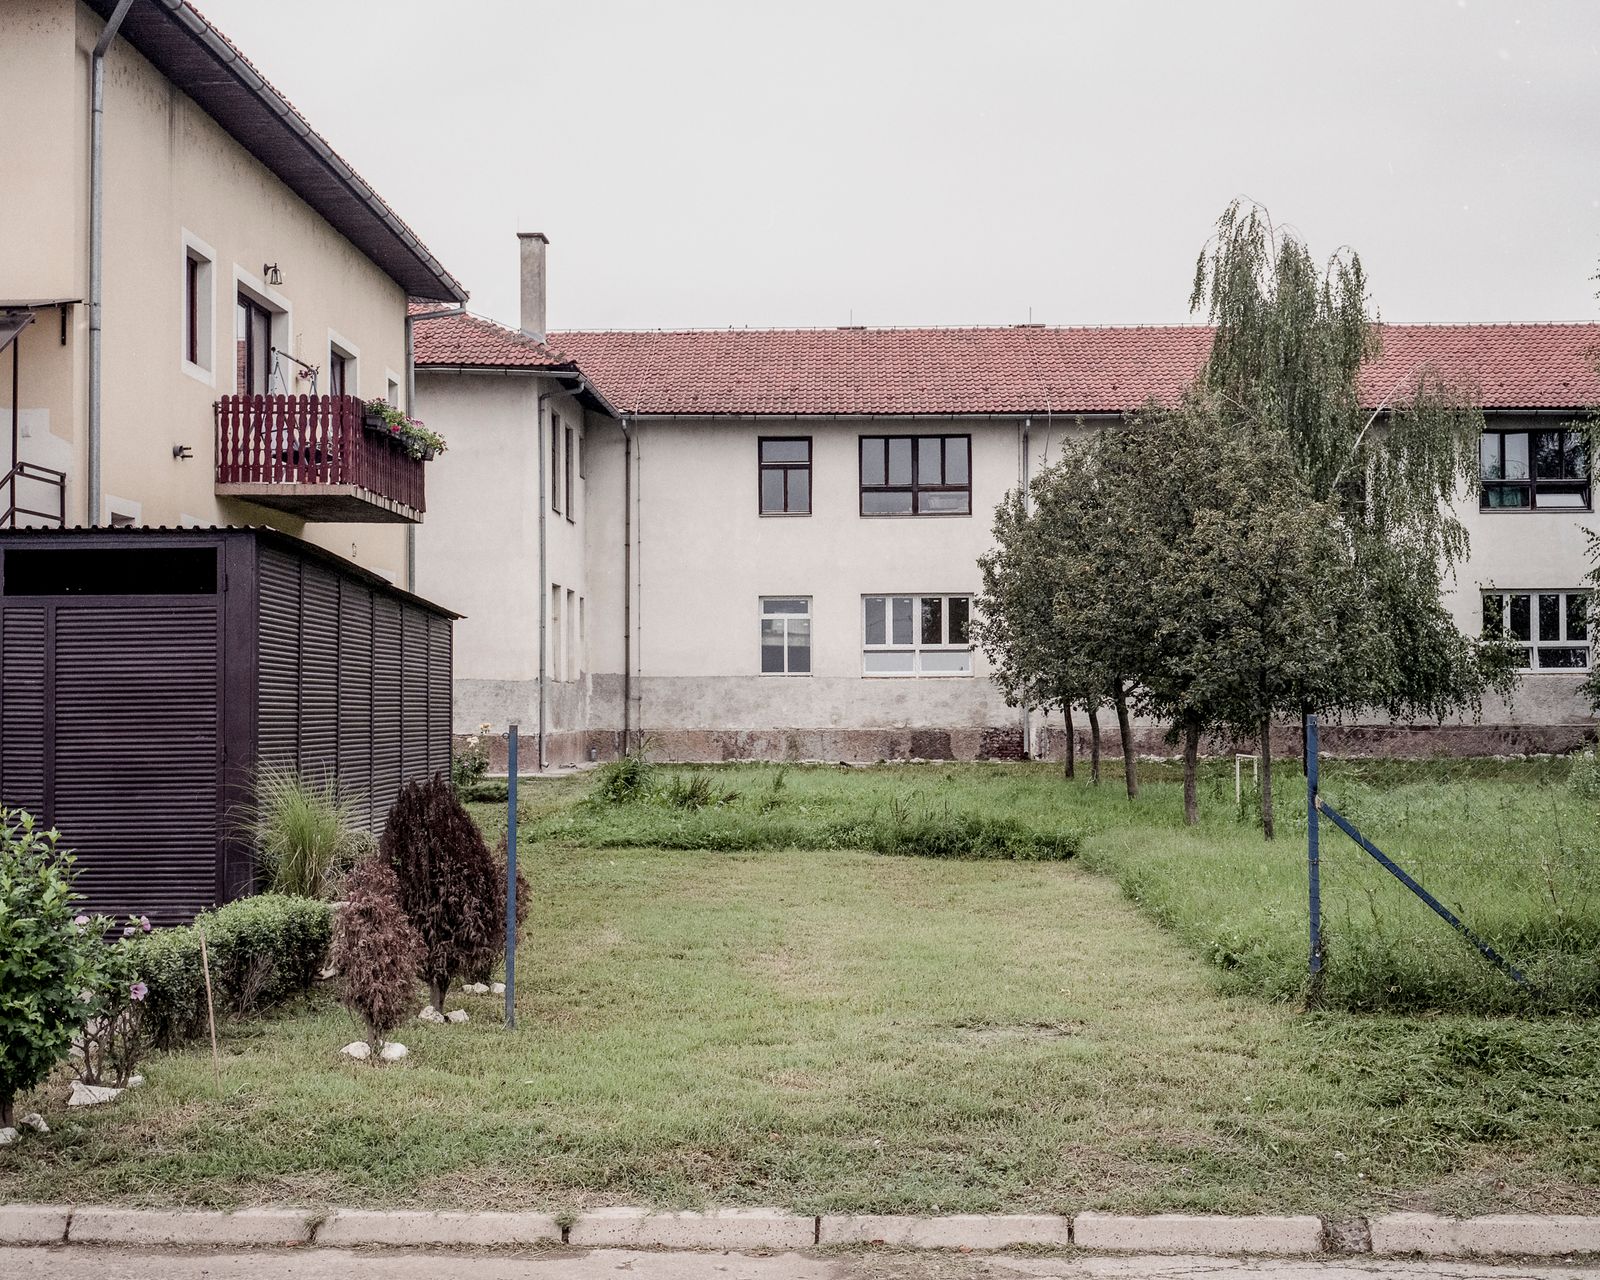 © Paweł Starzec - Image from the Makeshift photography project